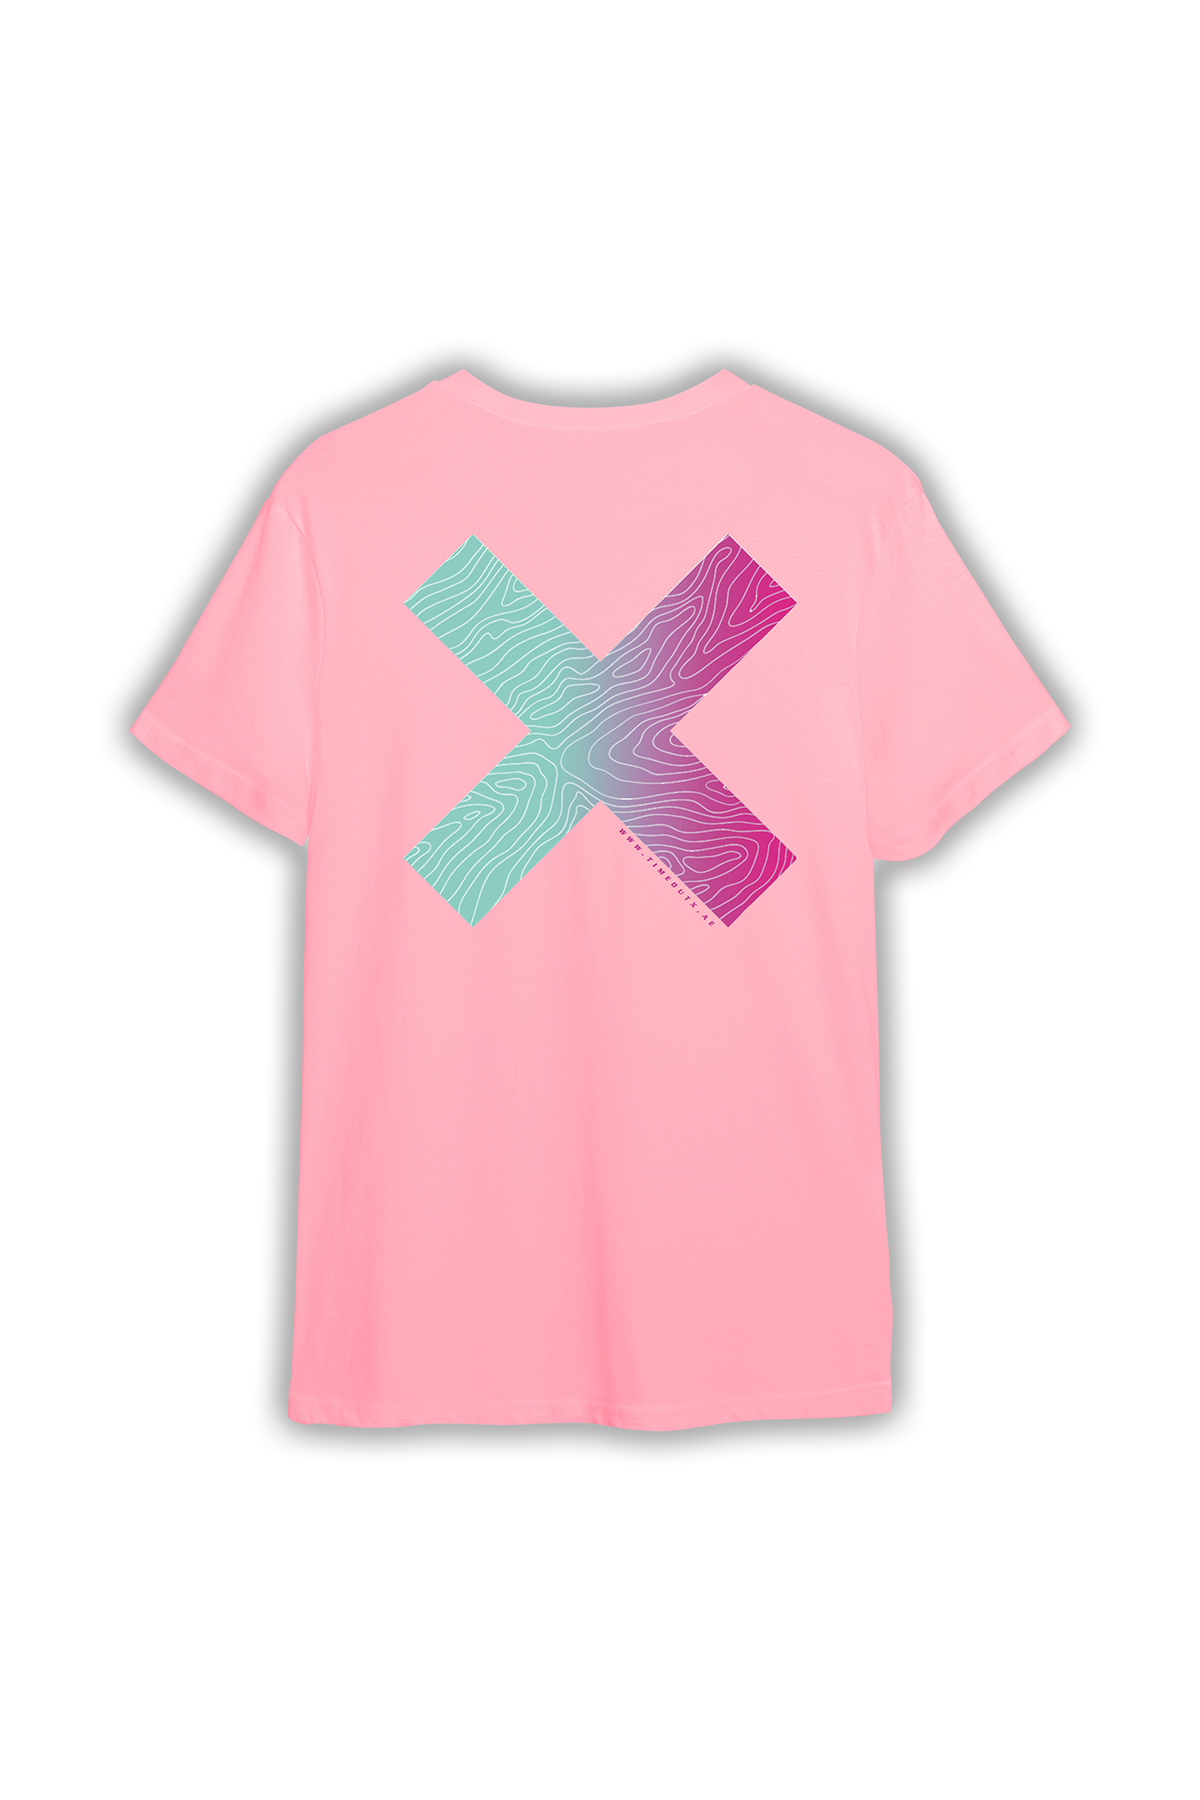 Unisex-Time-Out-X-Signature-Pure-Cotton-Vibrant-Pattern-Pink-T-shirt-for-Kids—Back